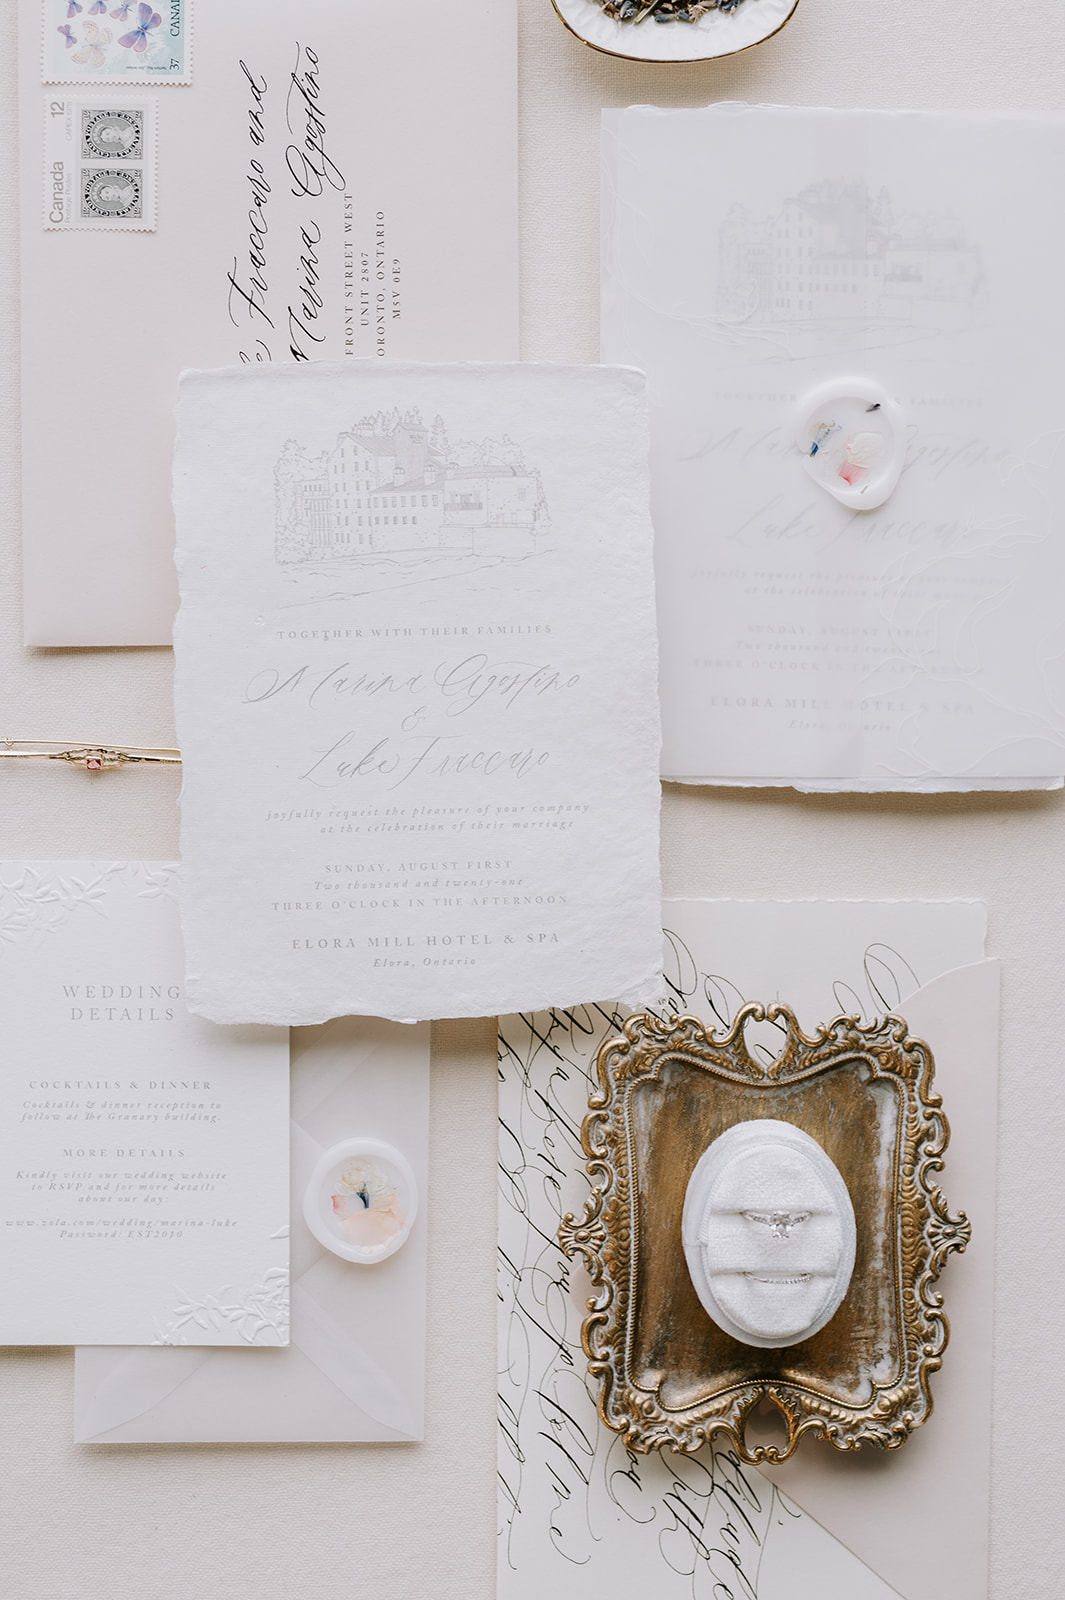 on hand made paper with deckle edges by olumis calligraphy, photography by eric cheng photography